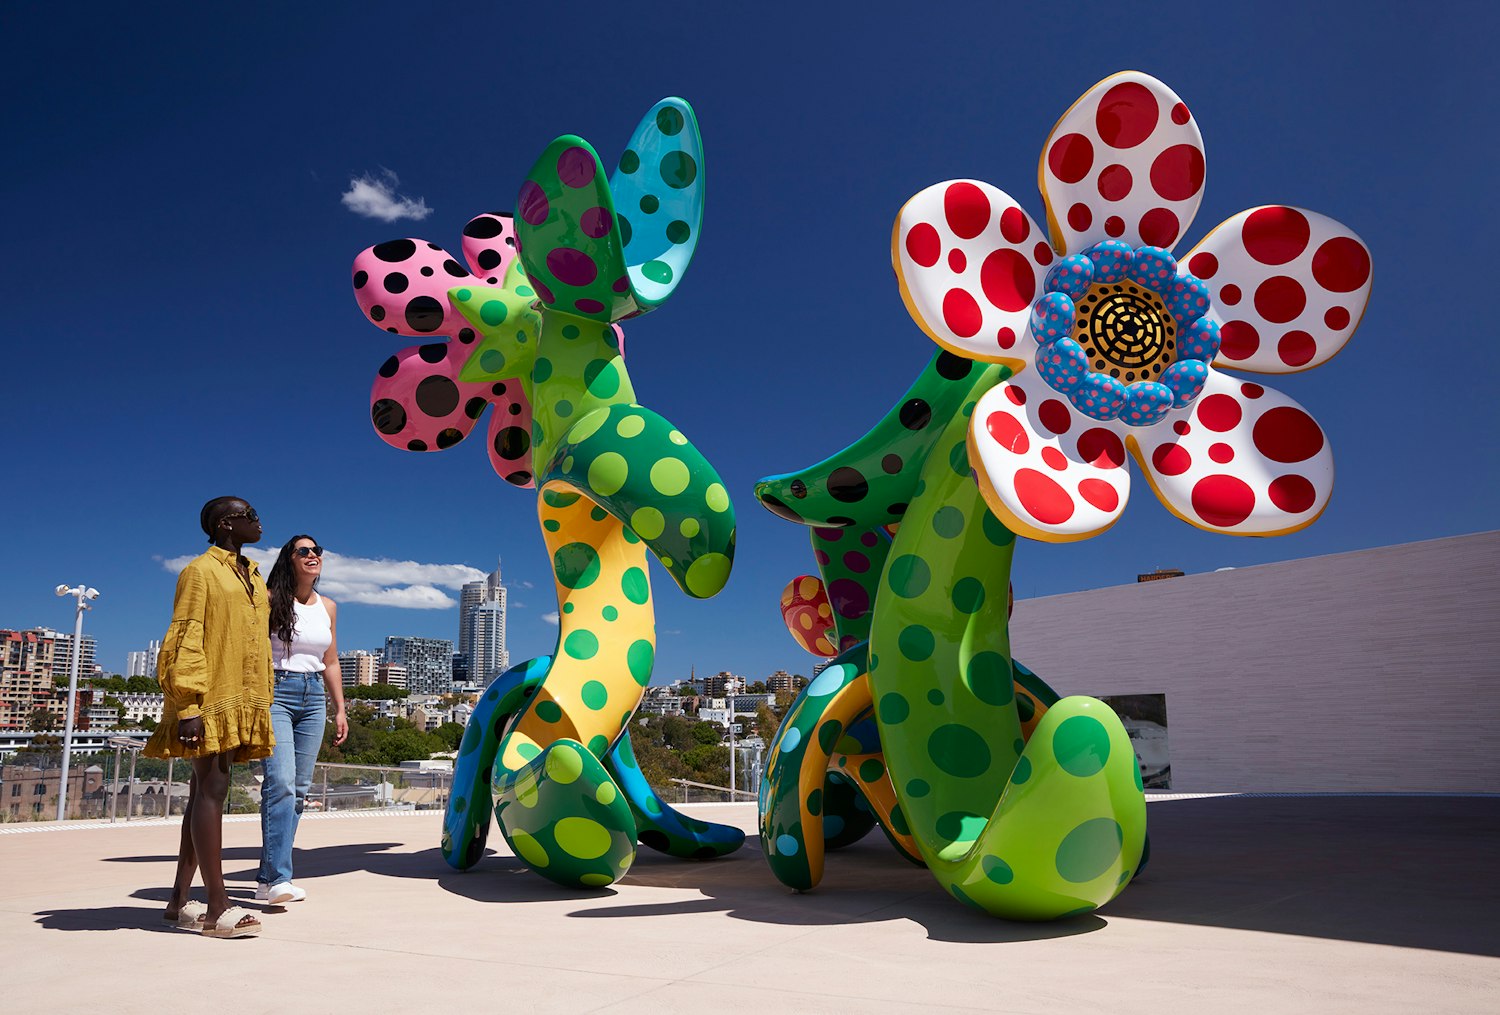 Two people on a terrace outdoors next to a large spotted flower sculpture with a city skyline in the background